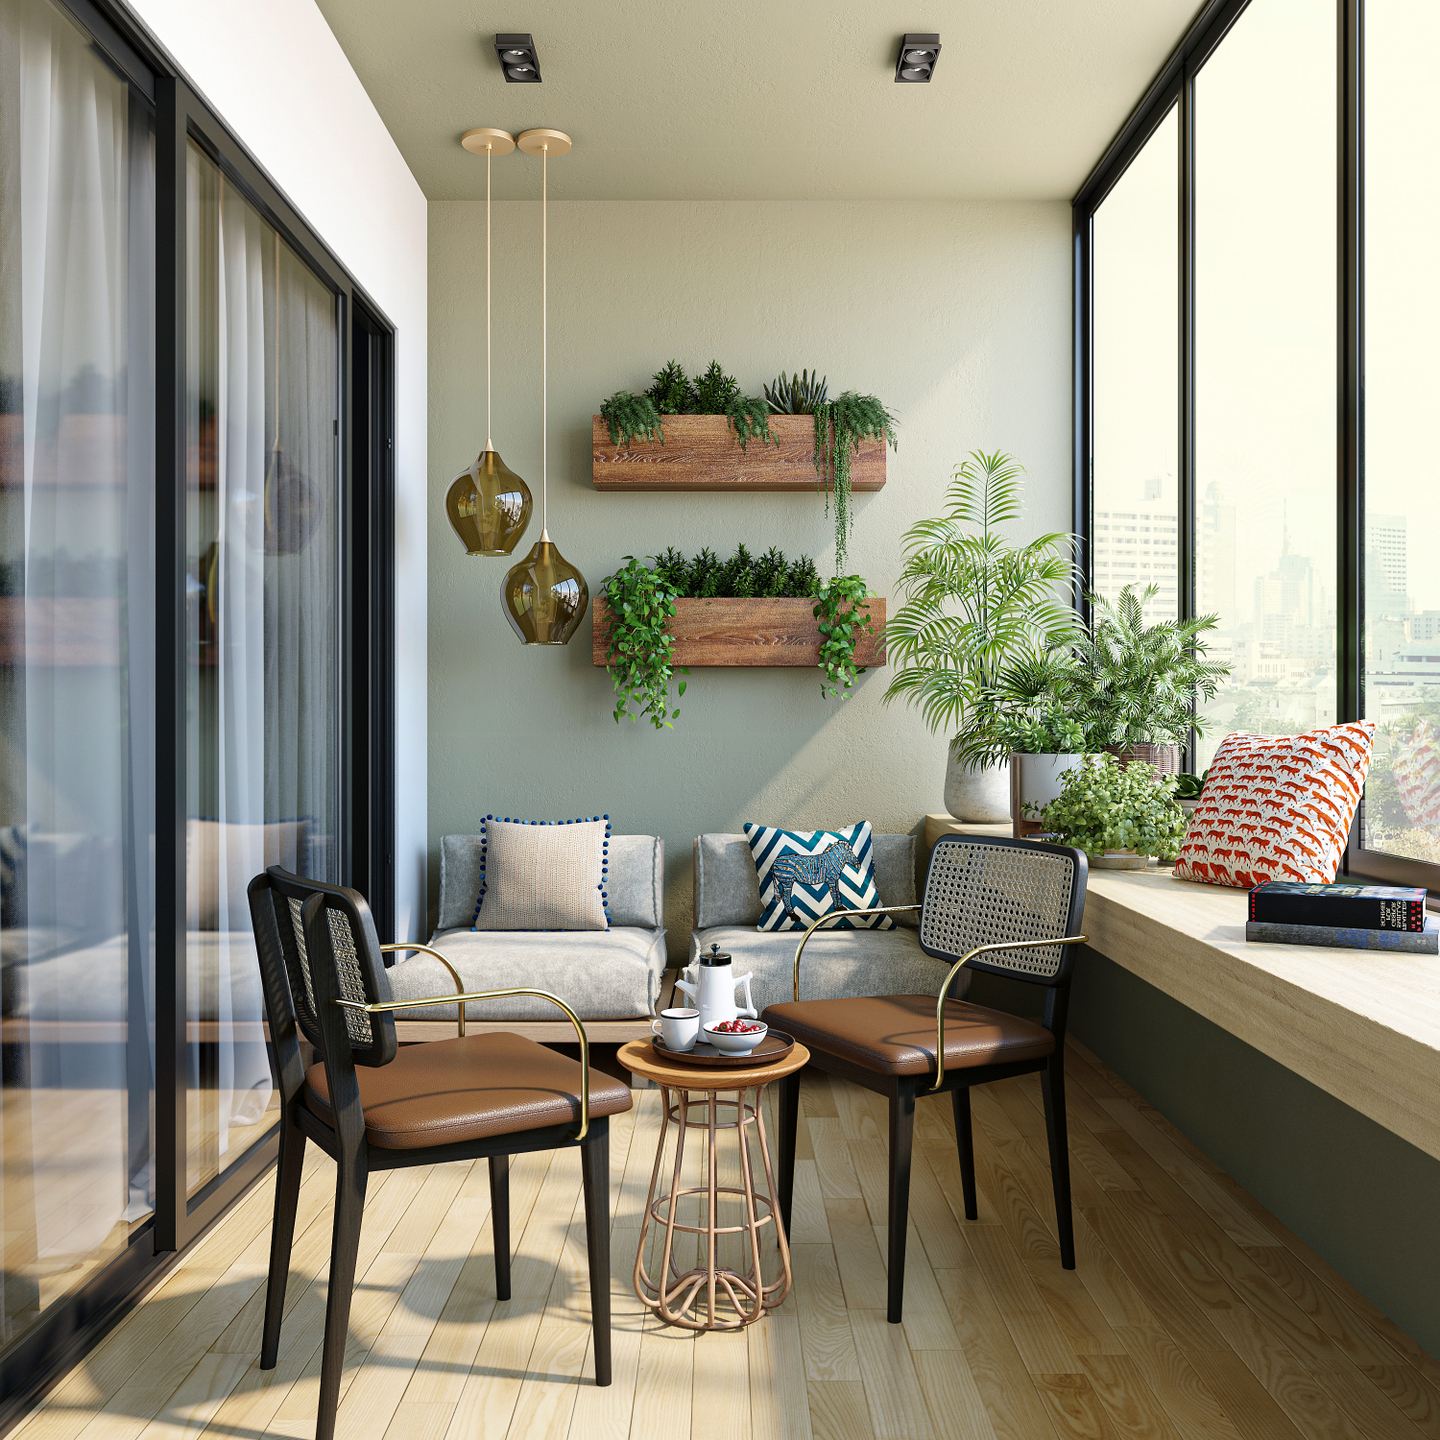 Warm-Comforting Balcony With Earthy Vibes - Livspace